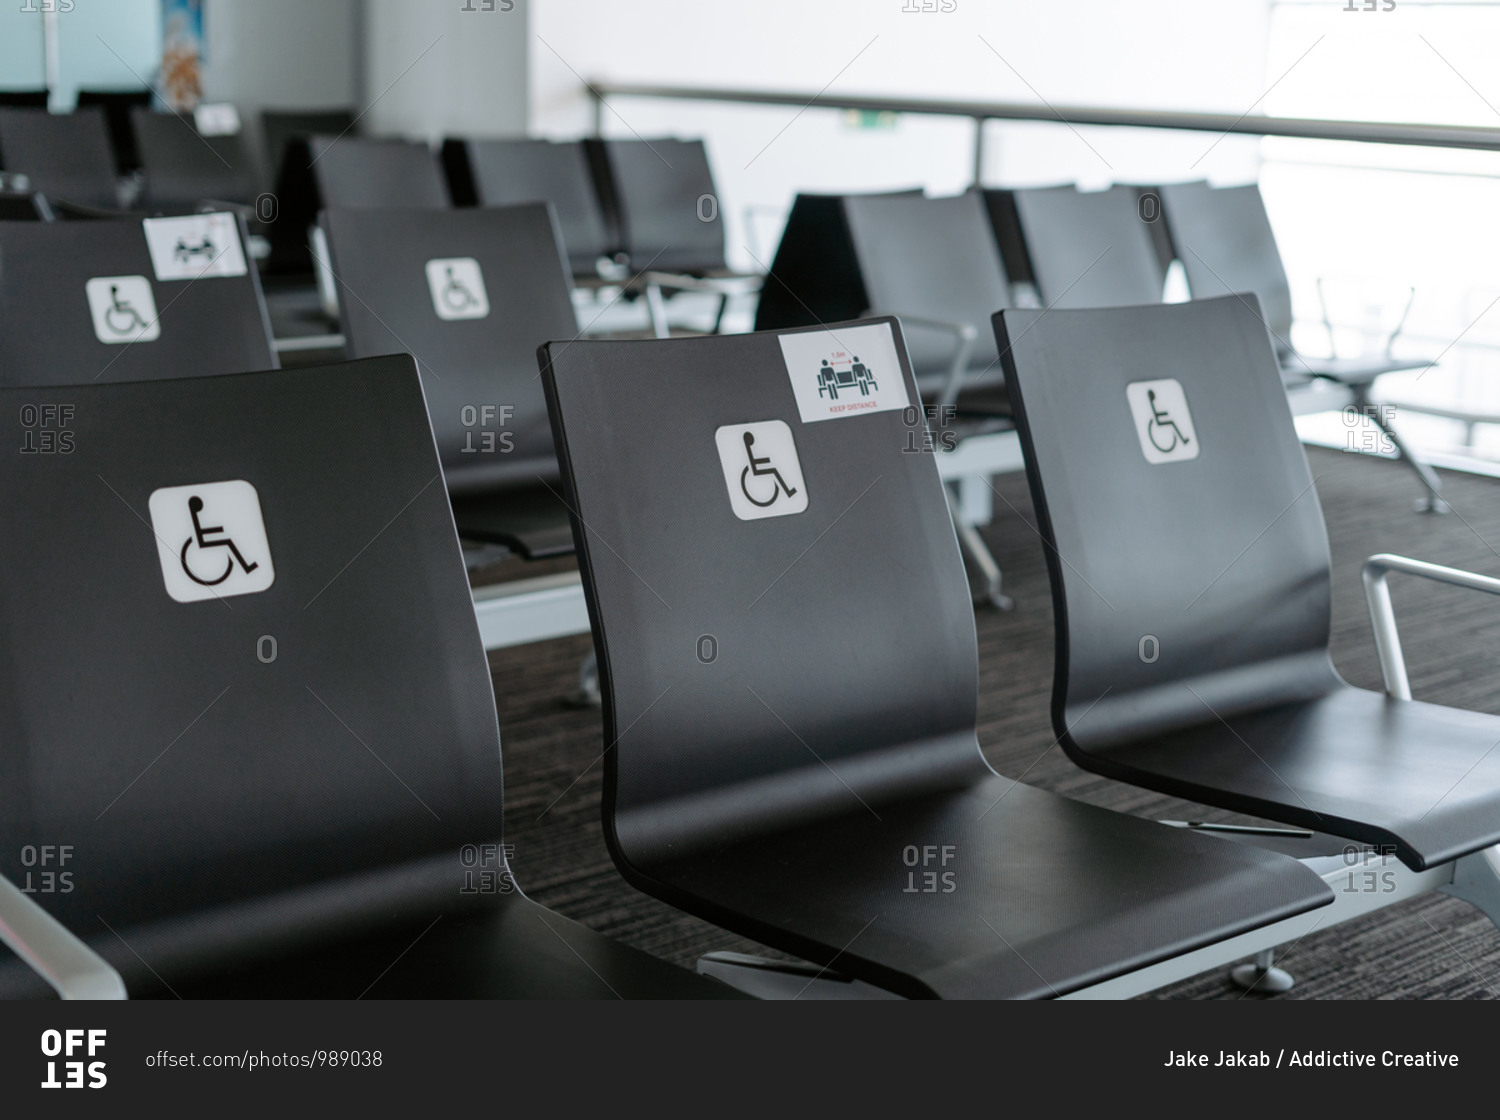 Rows of empty black seats in public waiting area for people with physical disabilities and people with special needs with square white sign demonstrating person on wheelchair